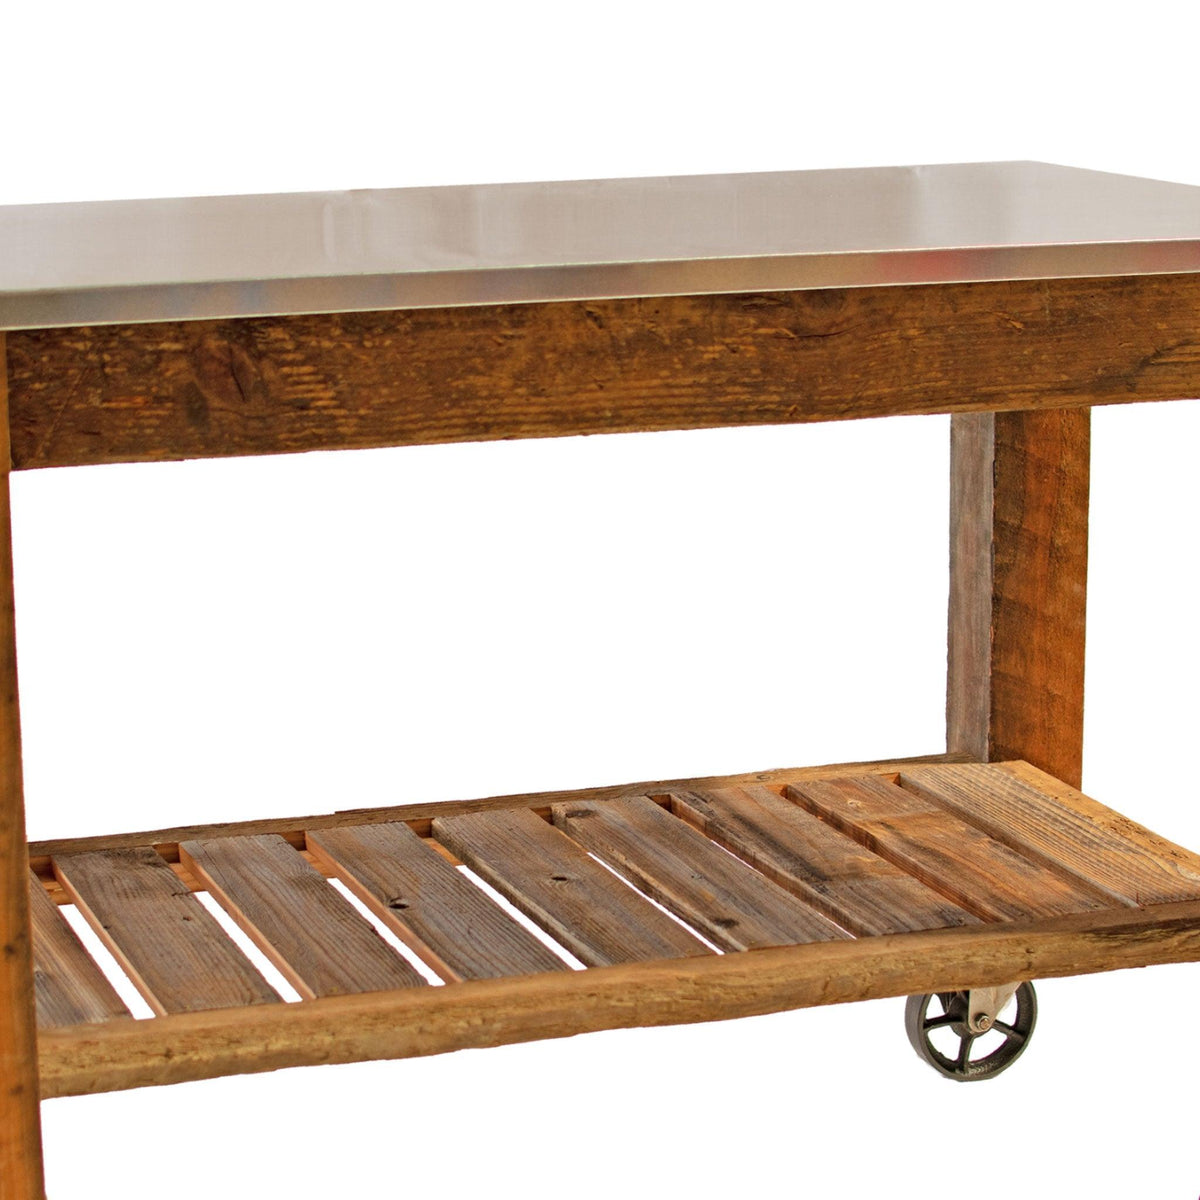 Close up of the countertop of Lee Display's Redwood Potting Table Rolling Cart with 6in Vintage Casters without Hardware Included on sale now at leedisplay.com